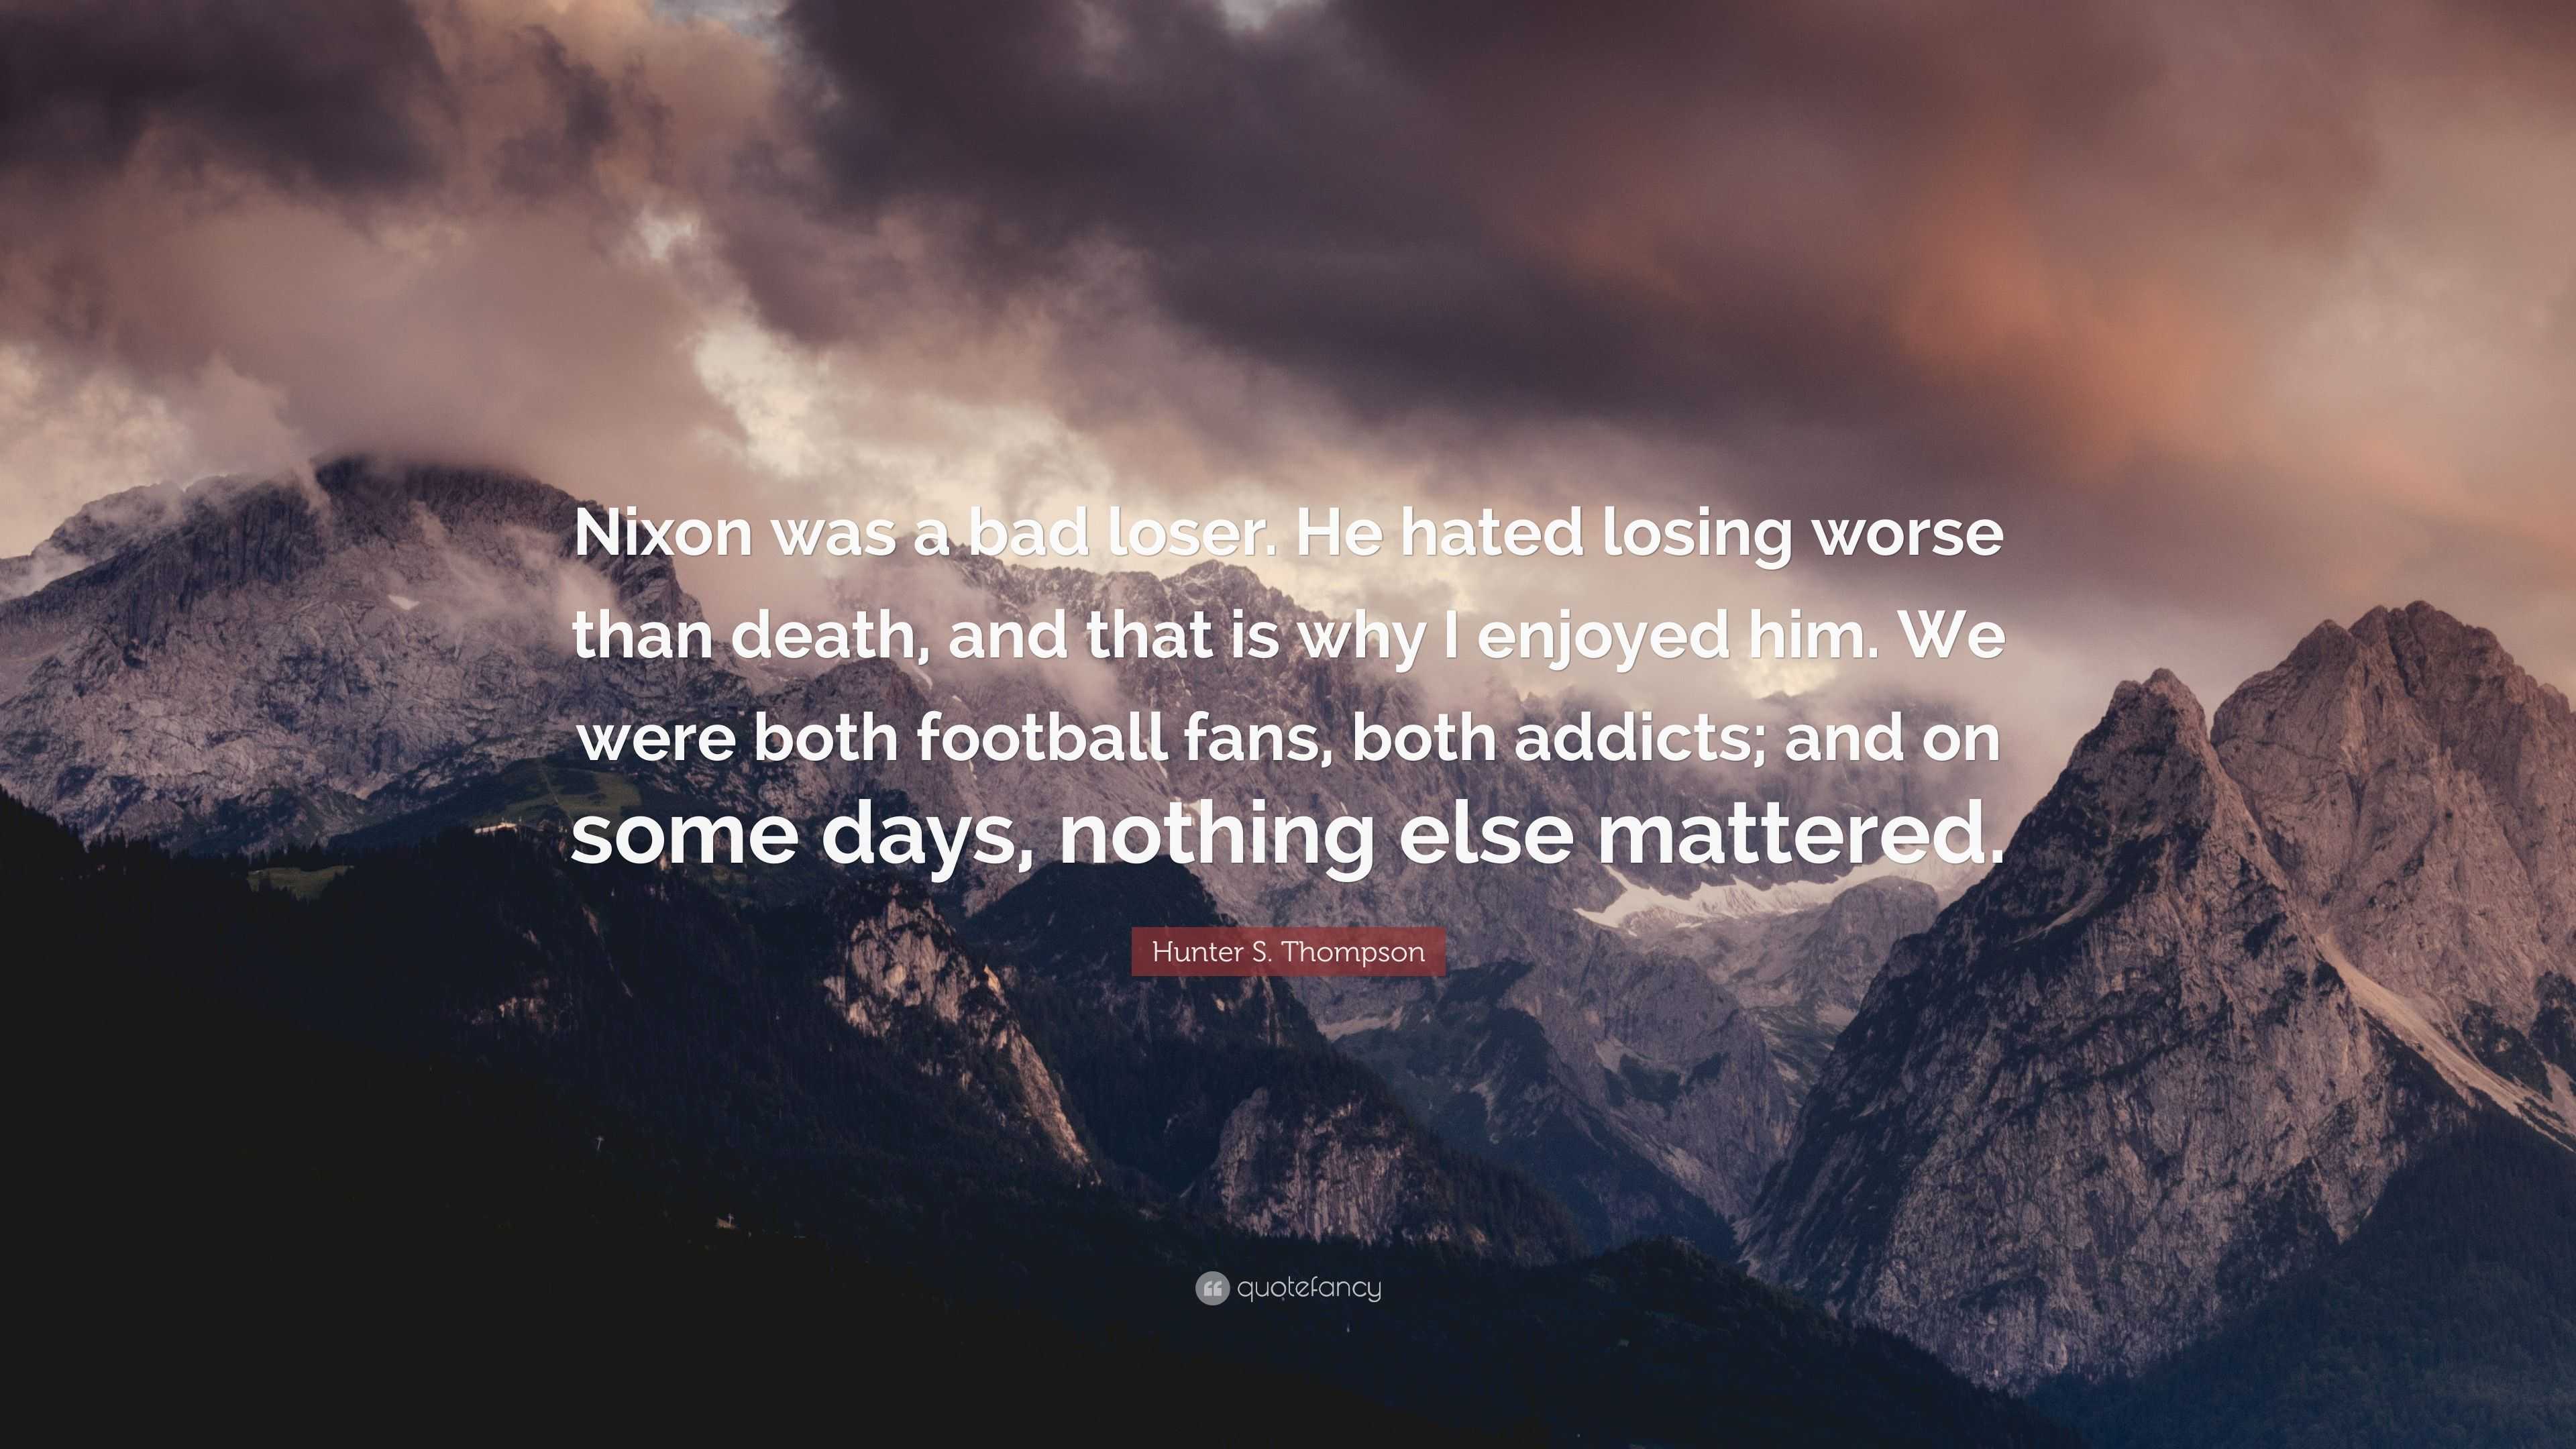 Hunter S. Thompson Quote: “Nixon was a bad loser. He hated losing worse ...